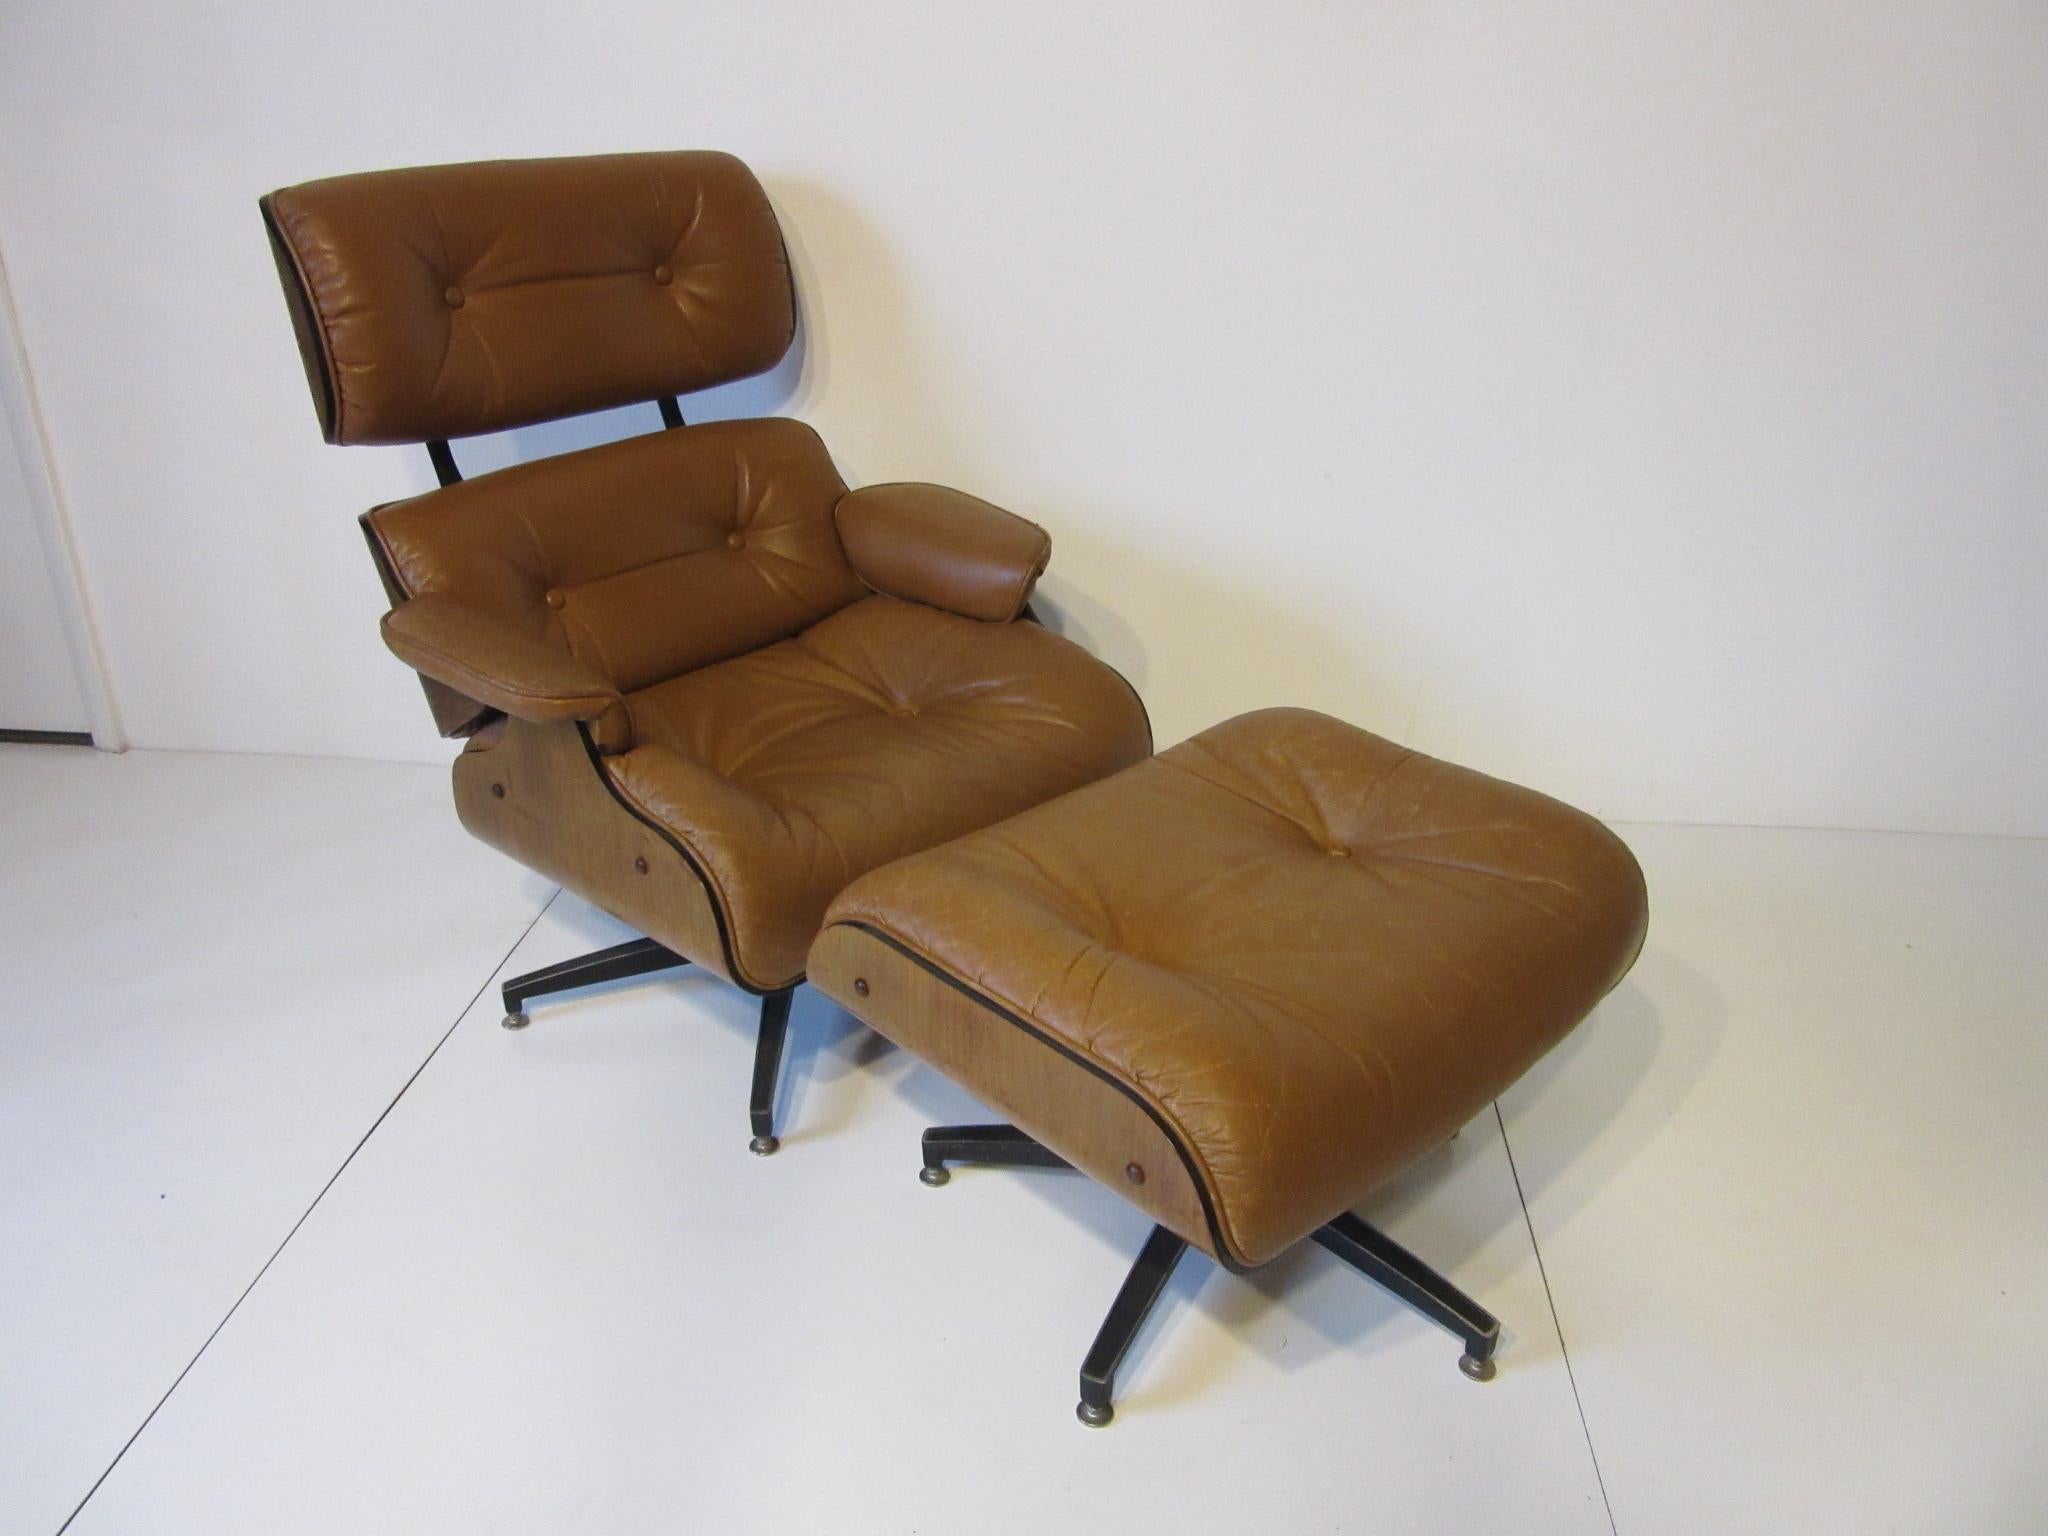 Selig Leather Lounge Chair or Ottoman in the style of Eames or Herman Miller 3